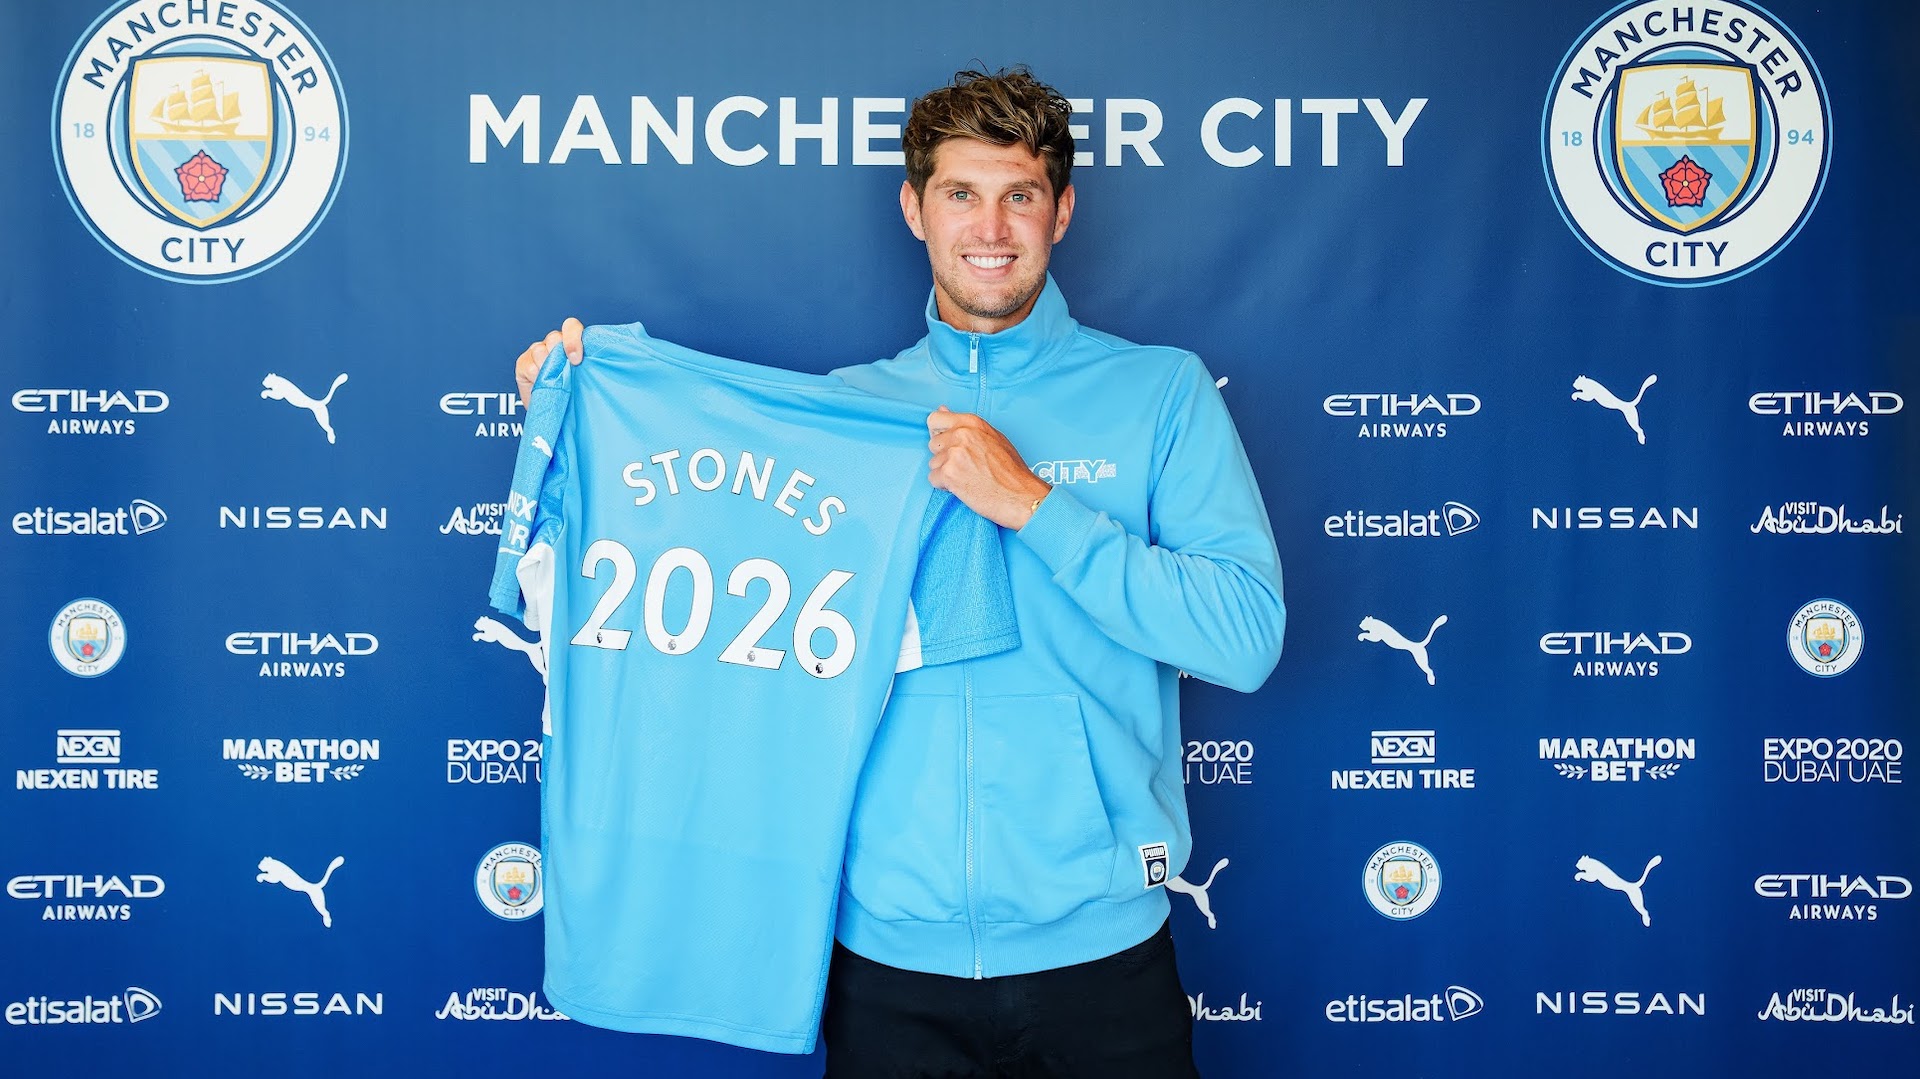 Stones signs new five-year contract with Manchester City